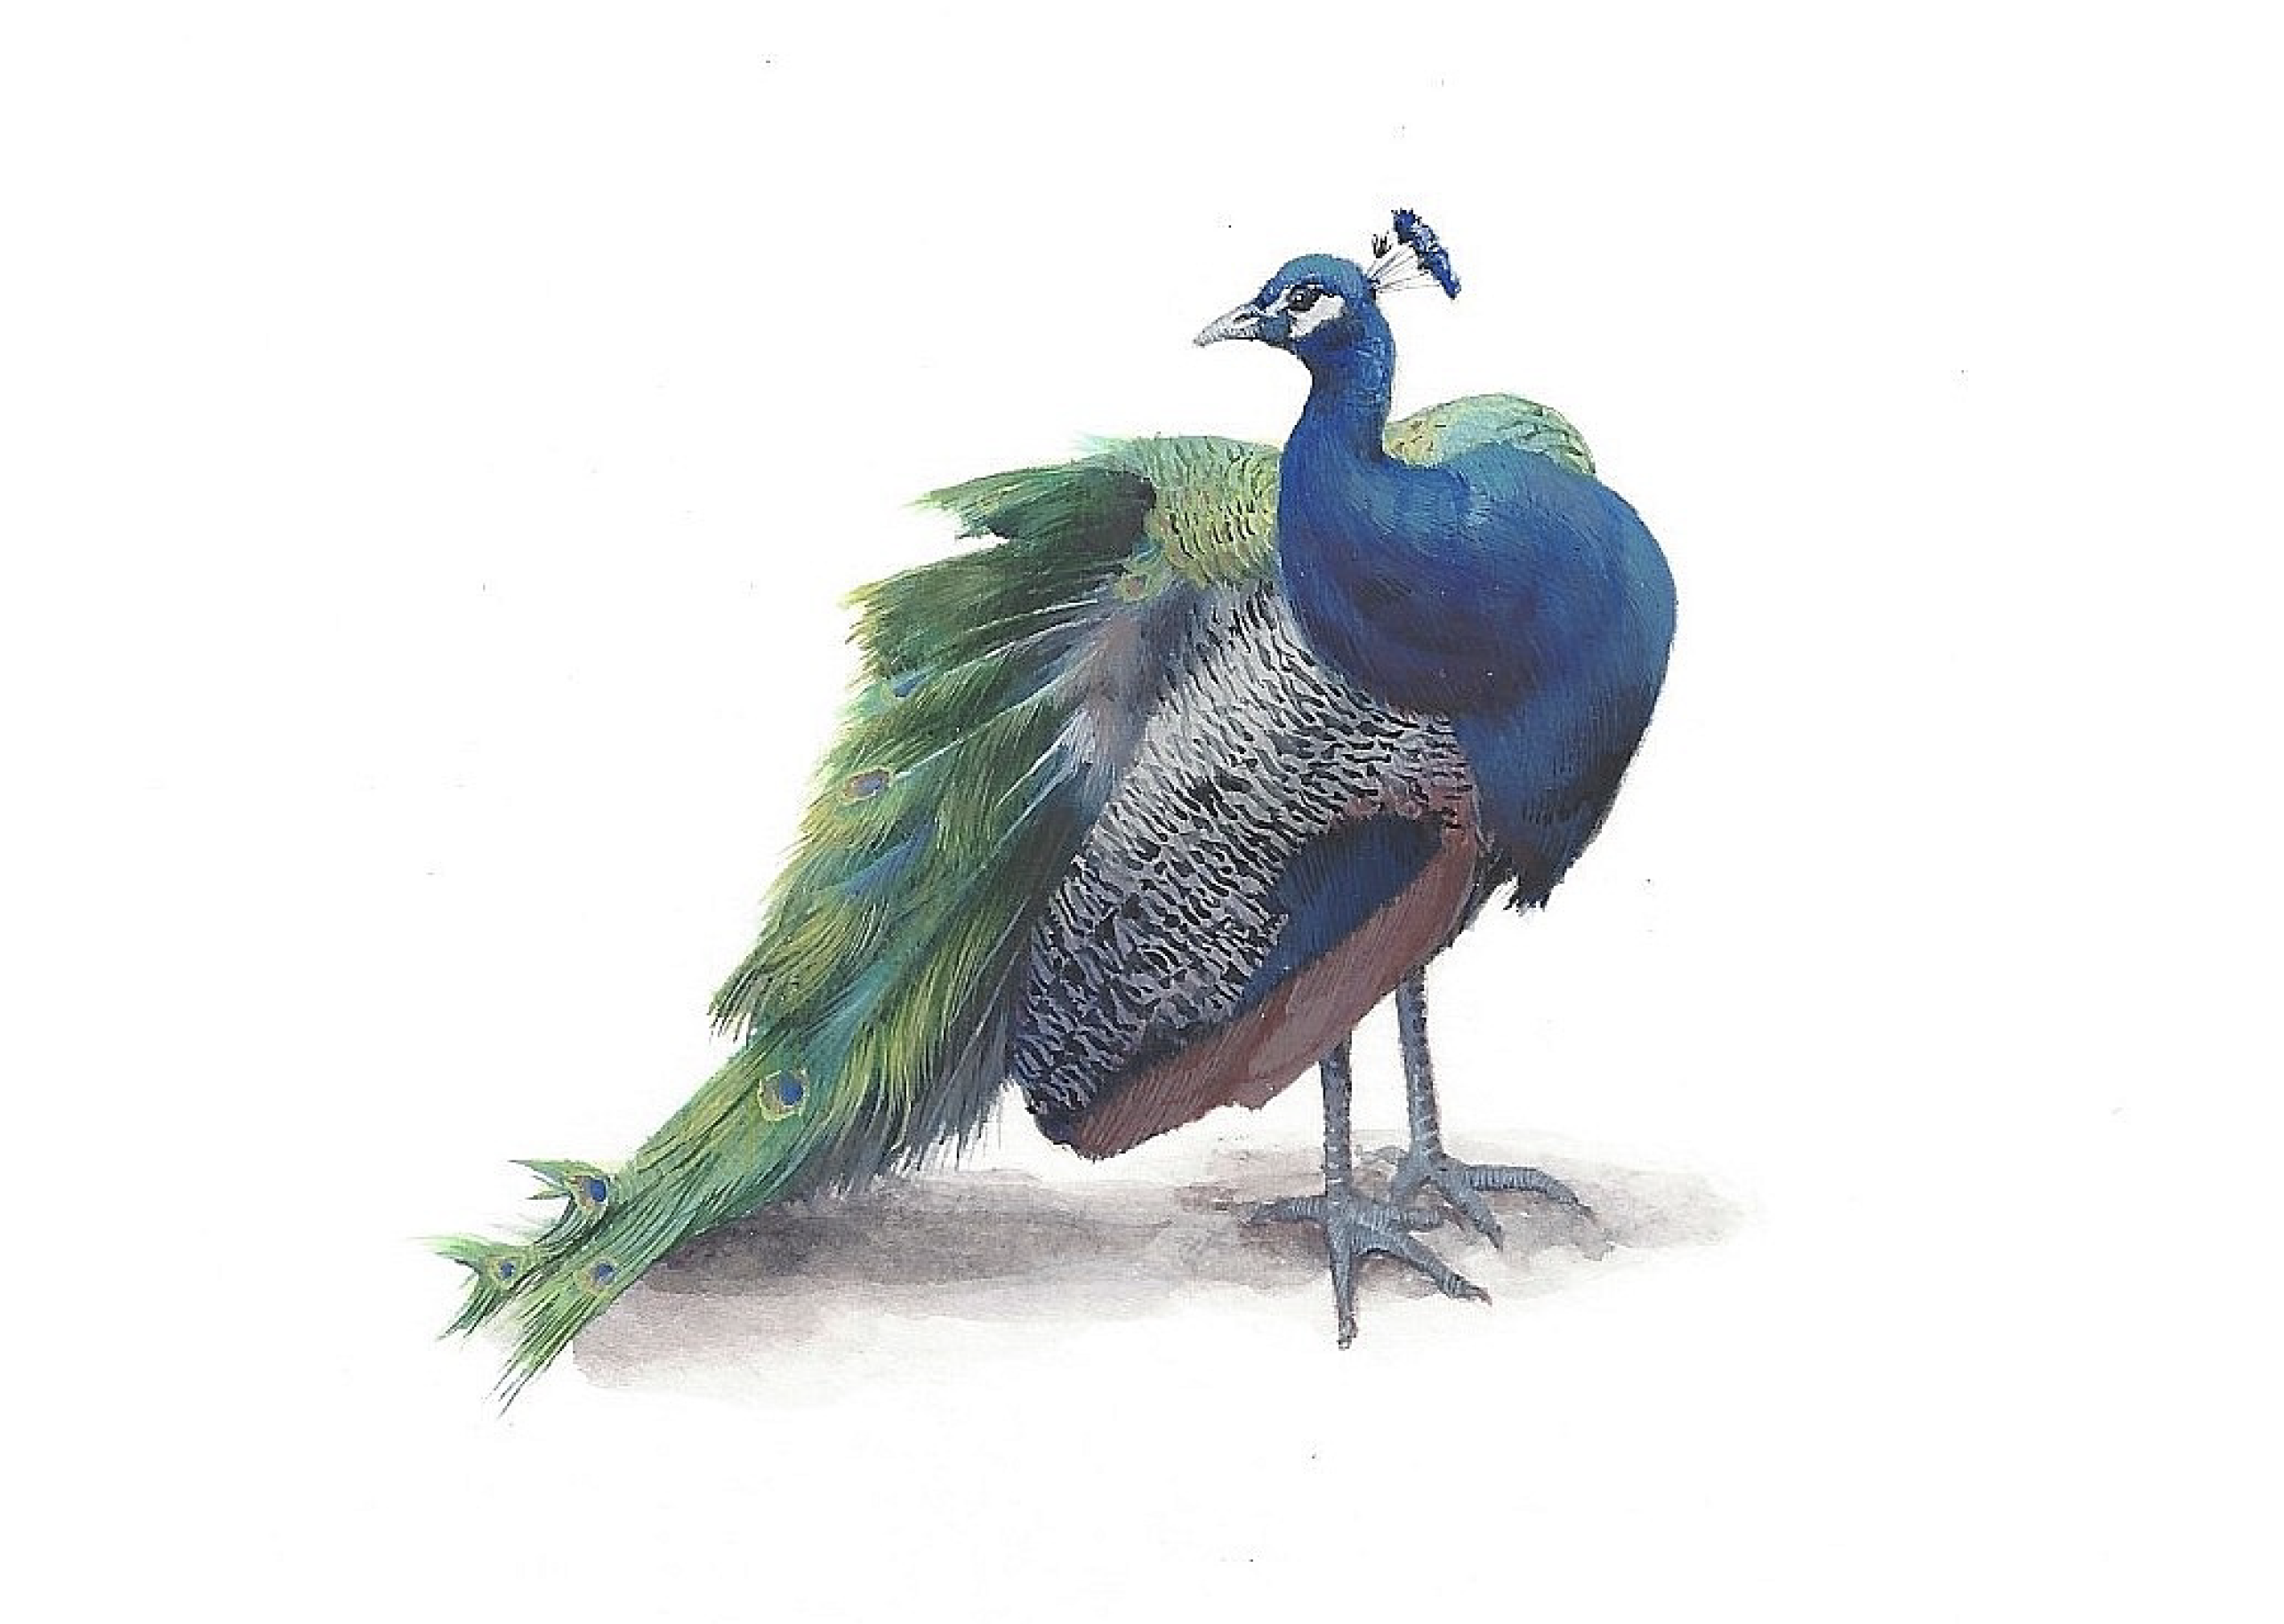 Drawing of a peacock